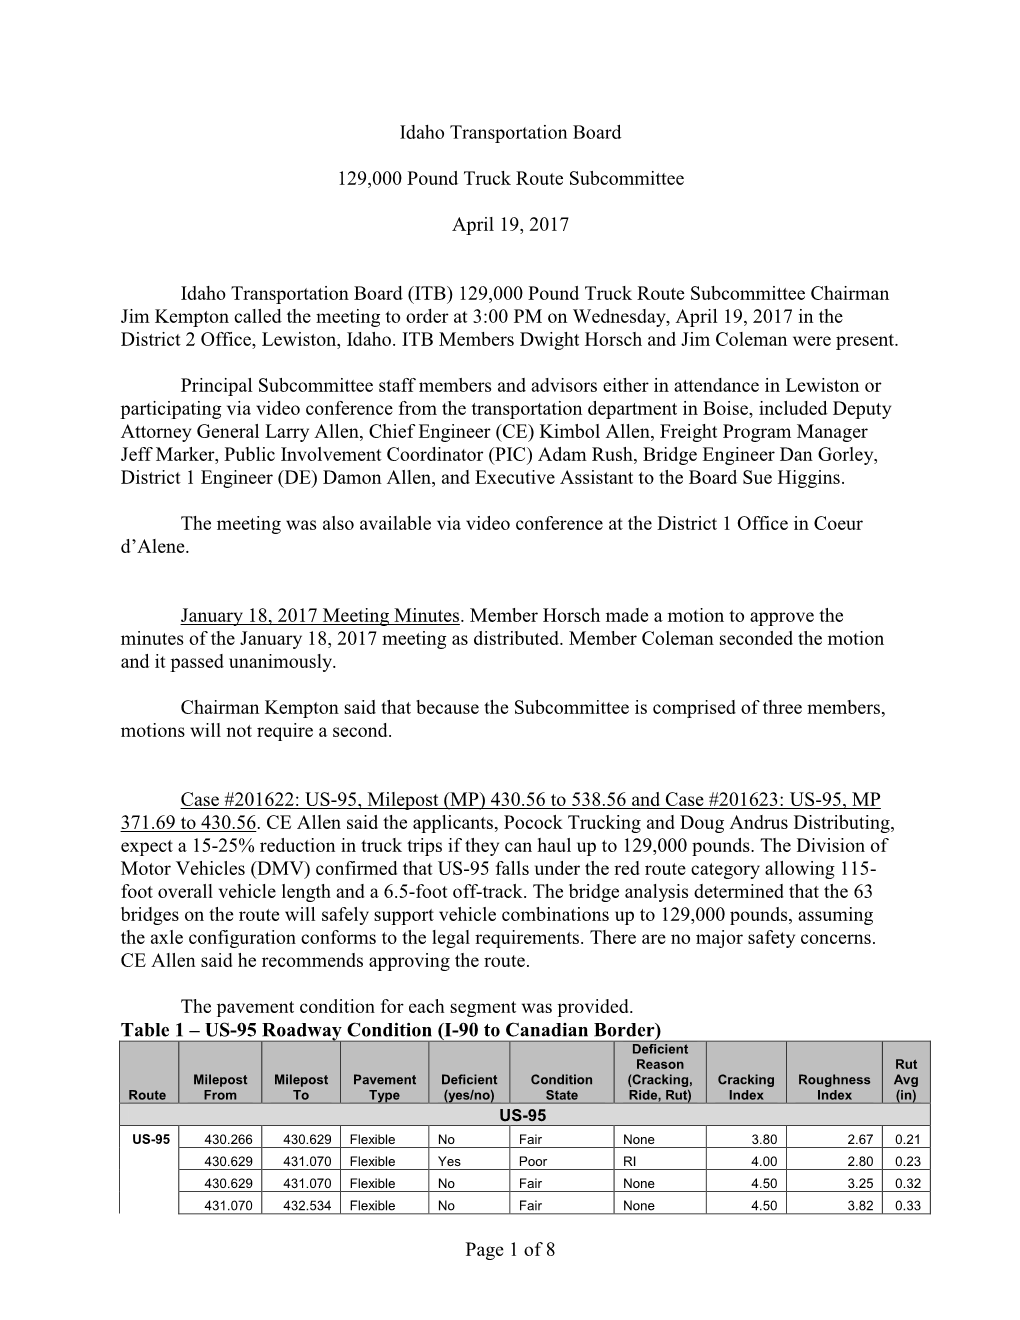 Page 1 of 8 Idaho Transportation Board 129,000 Pound Truck Route